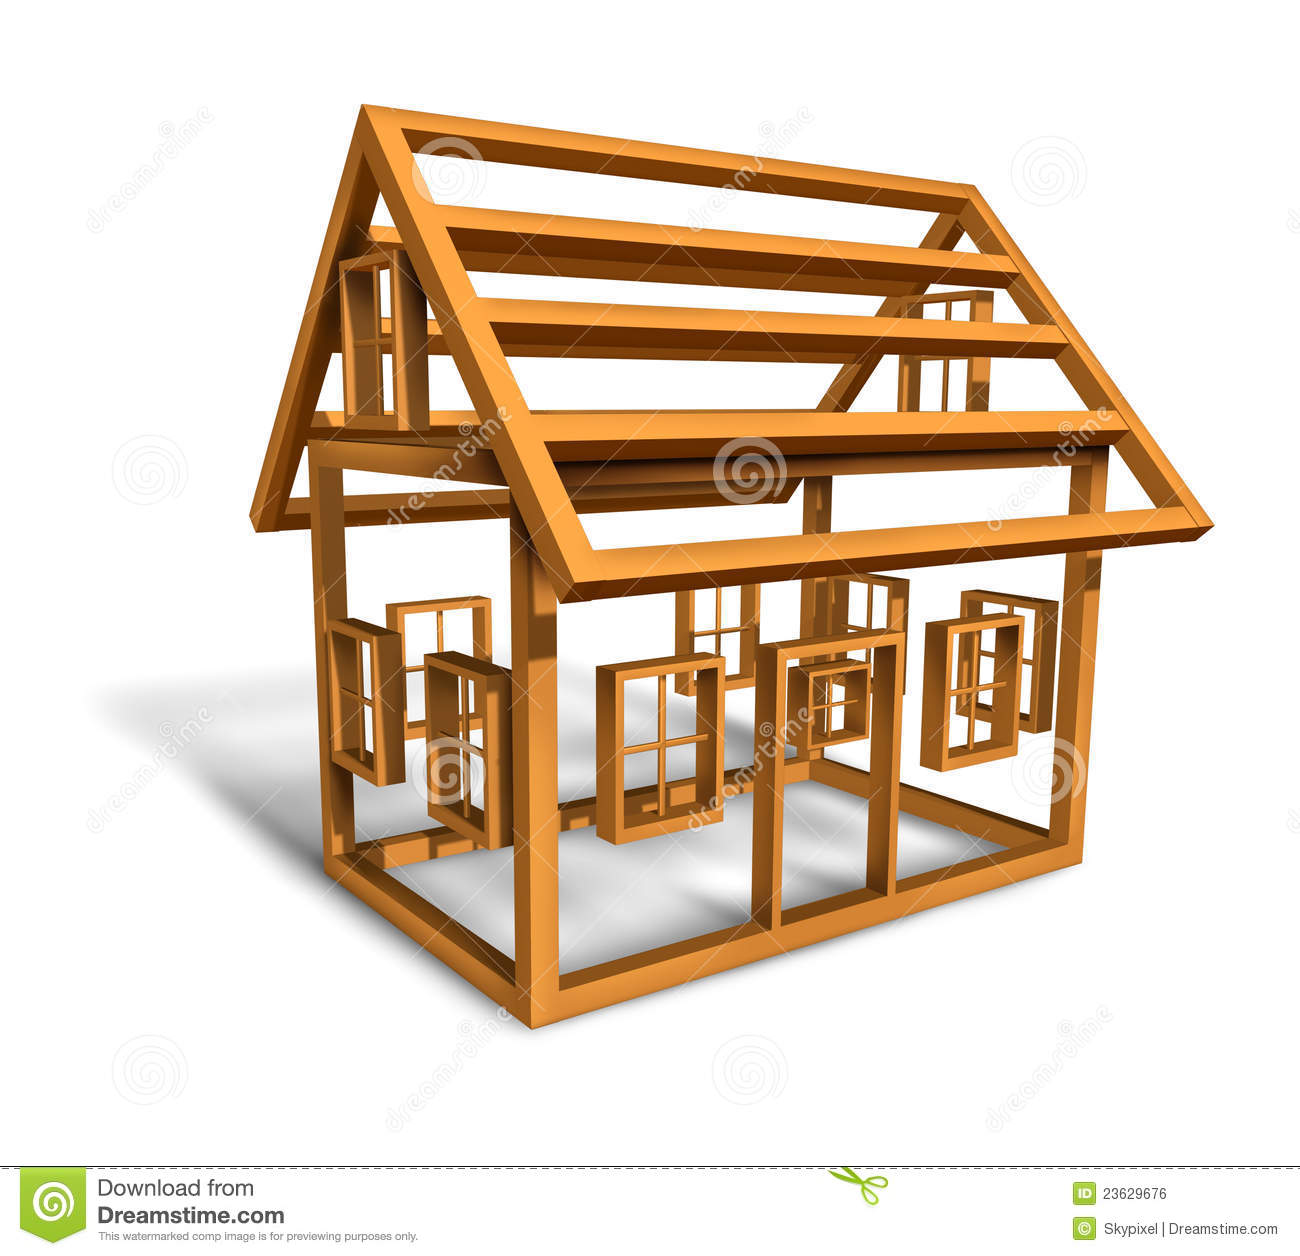 Home Construction With The Wood Frame Structure Of A House Being Built